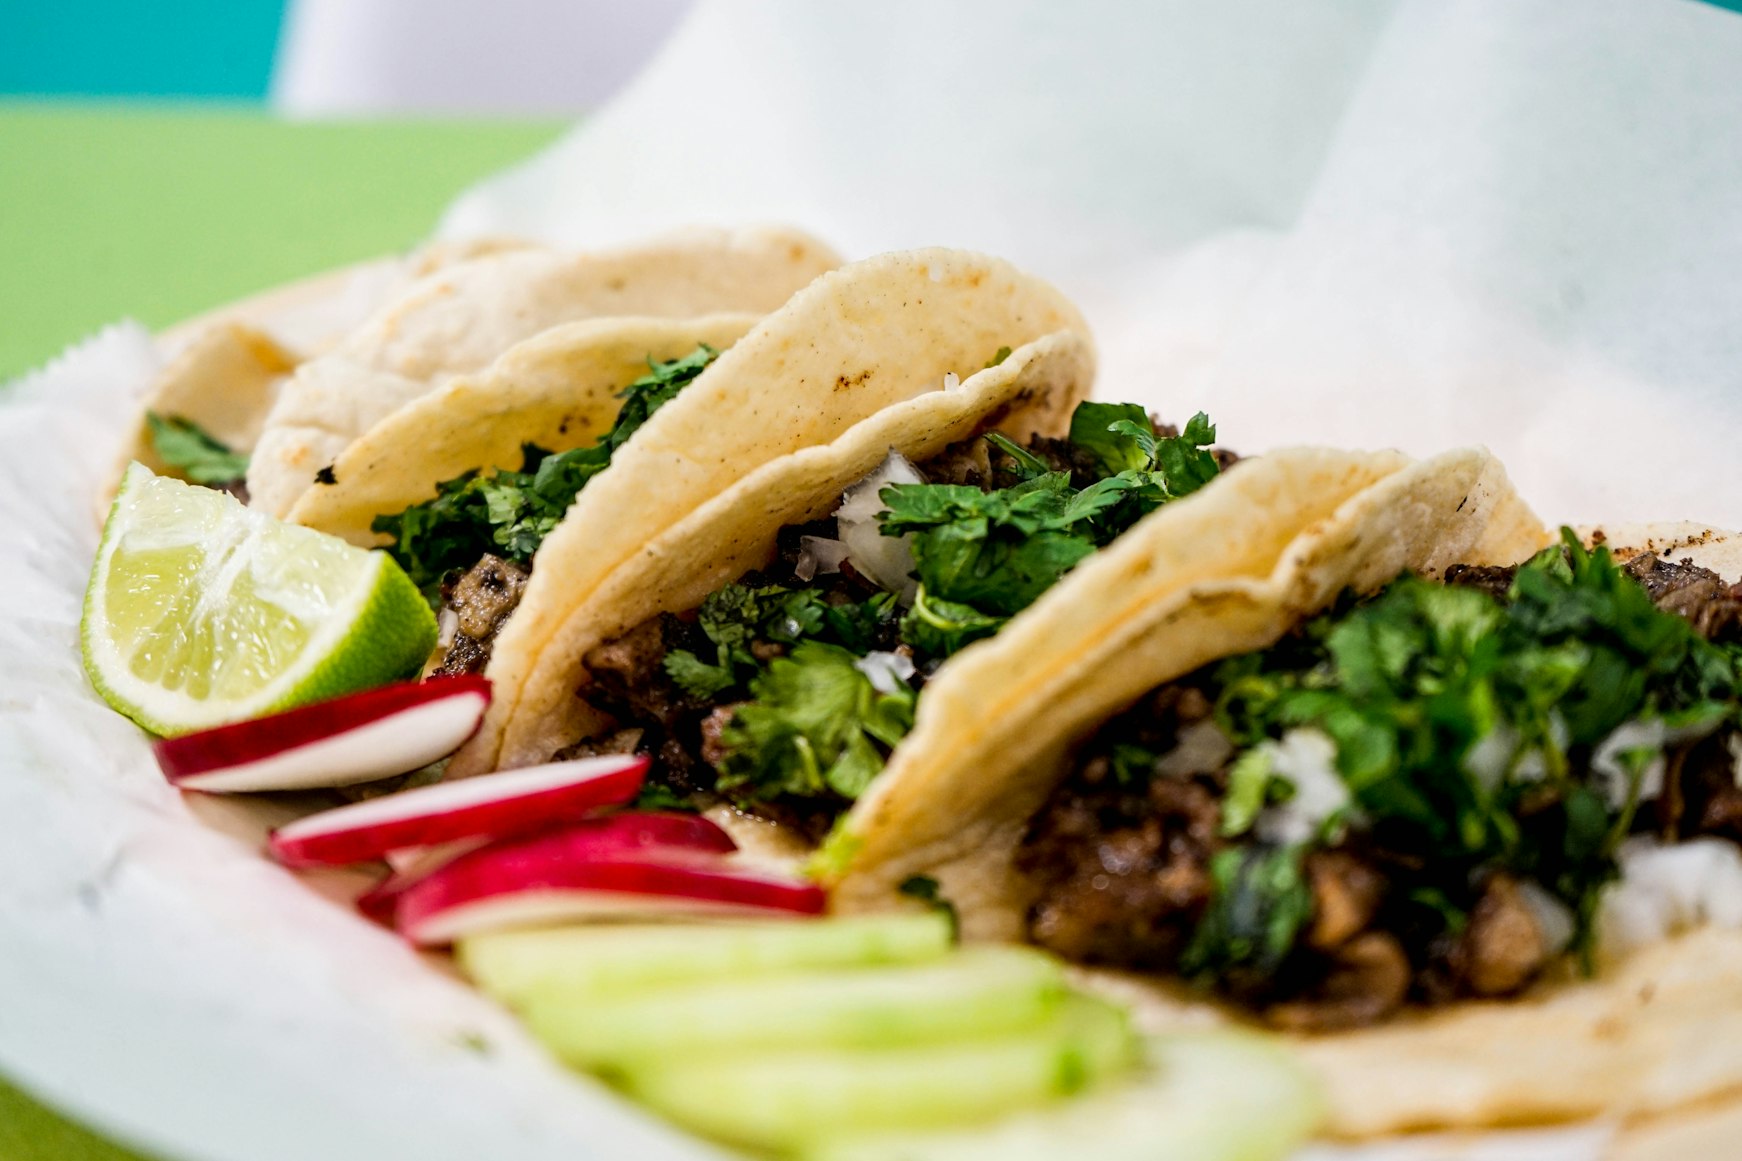 Tacos became a fusion of Mexican and Swedish cultures in Sweden. (Photo: Tai's Captures/Unsplash)